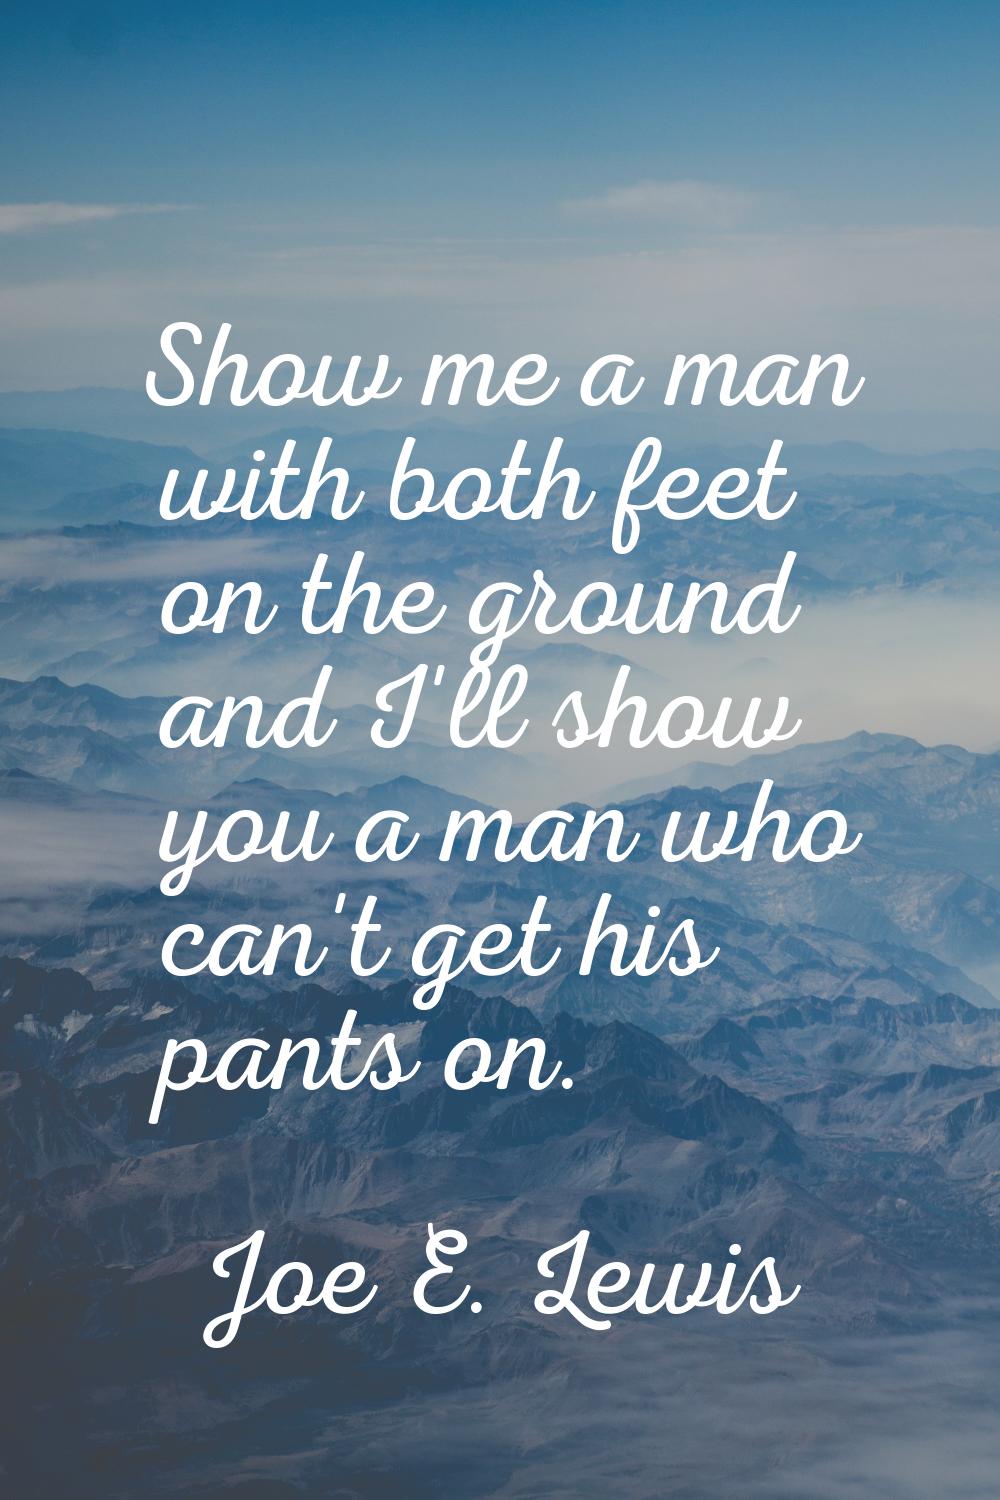 Show me a man with both feet on the ground and I'll show you a man who can't get his pants on.